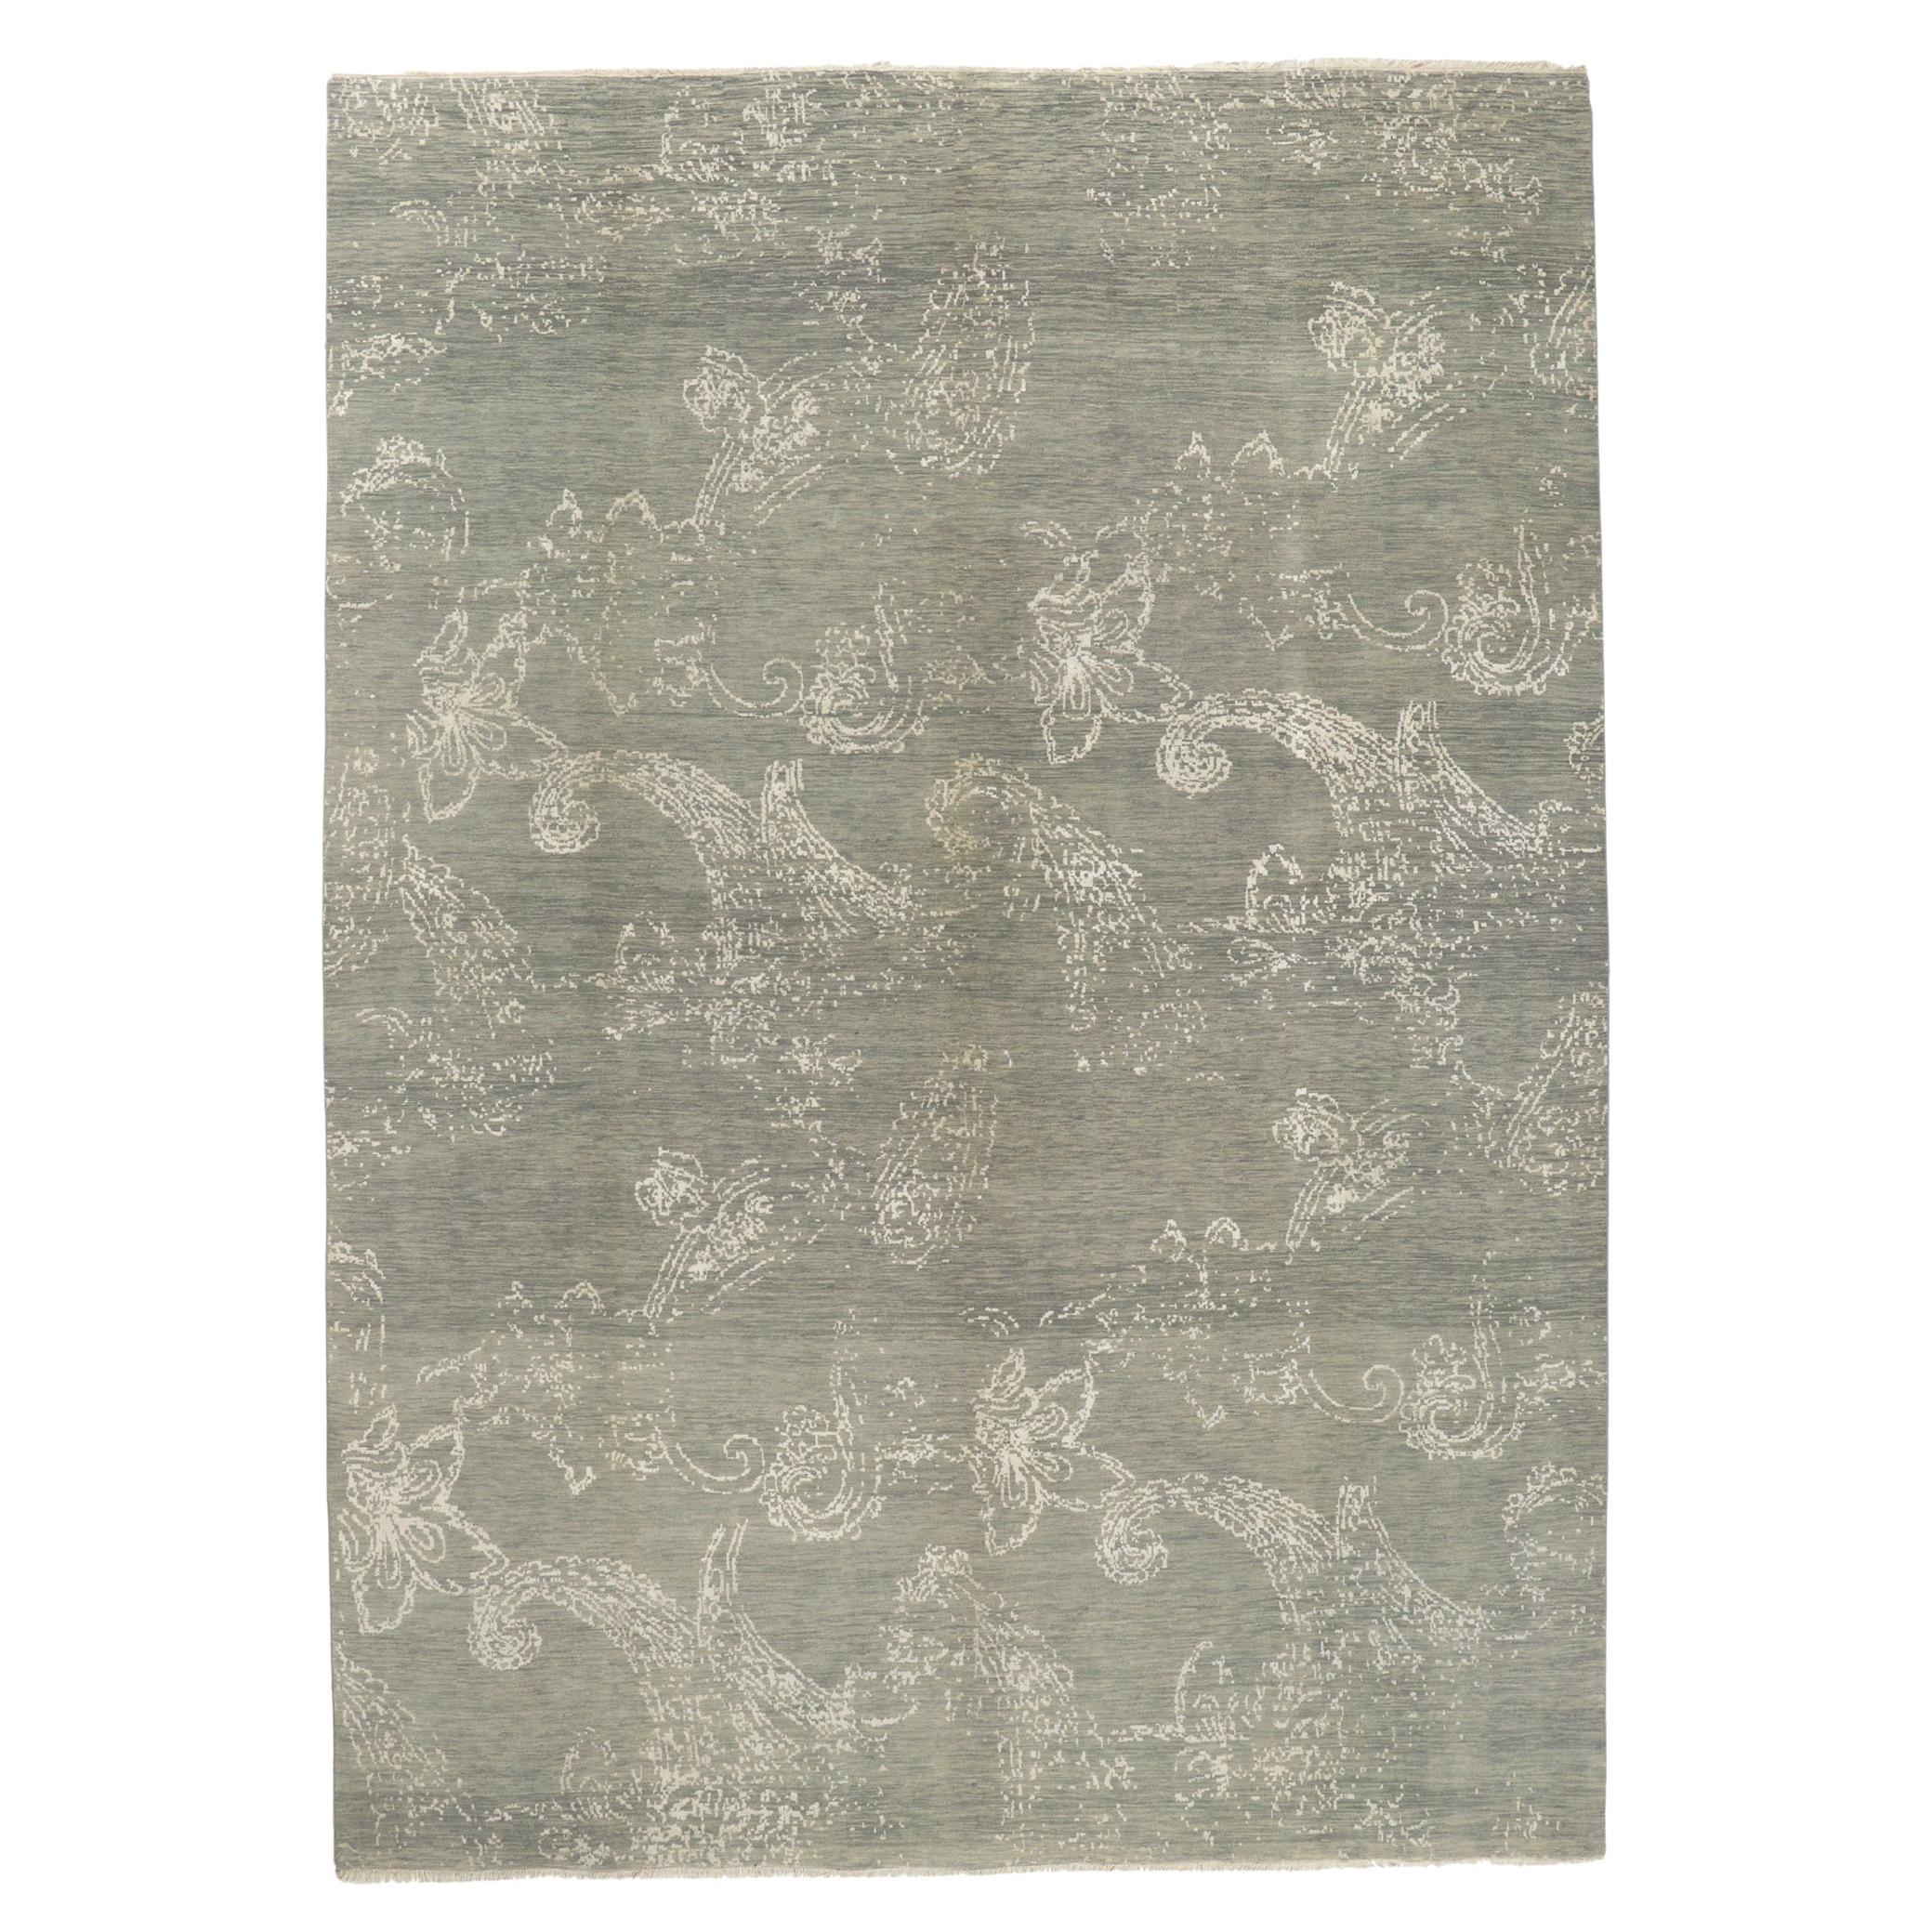 New Gray Transitional Area Rug with Modern Erased Design